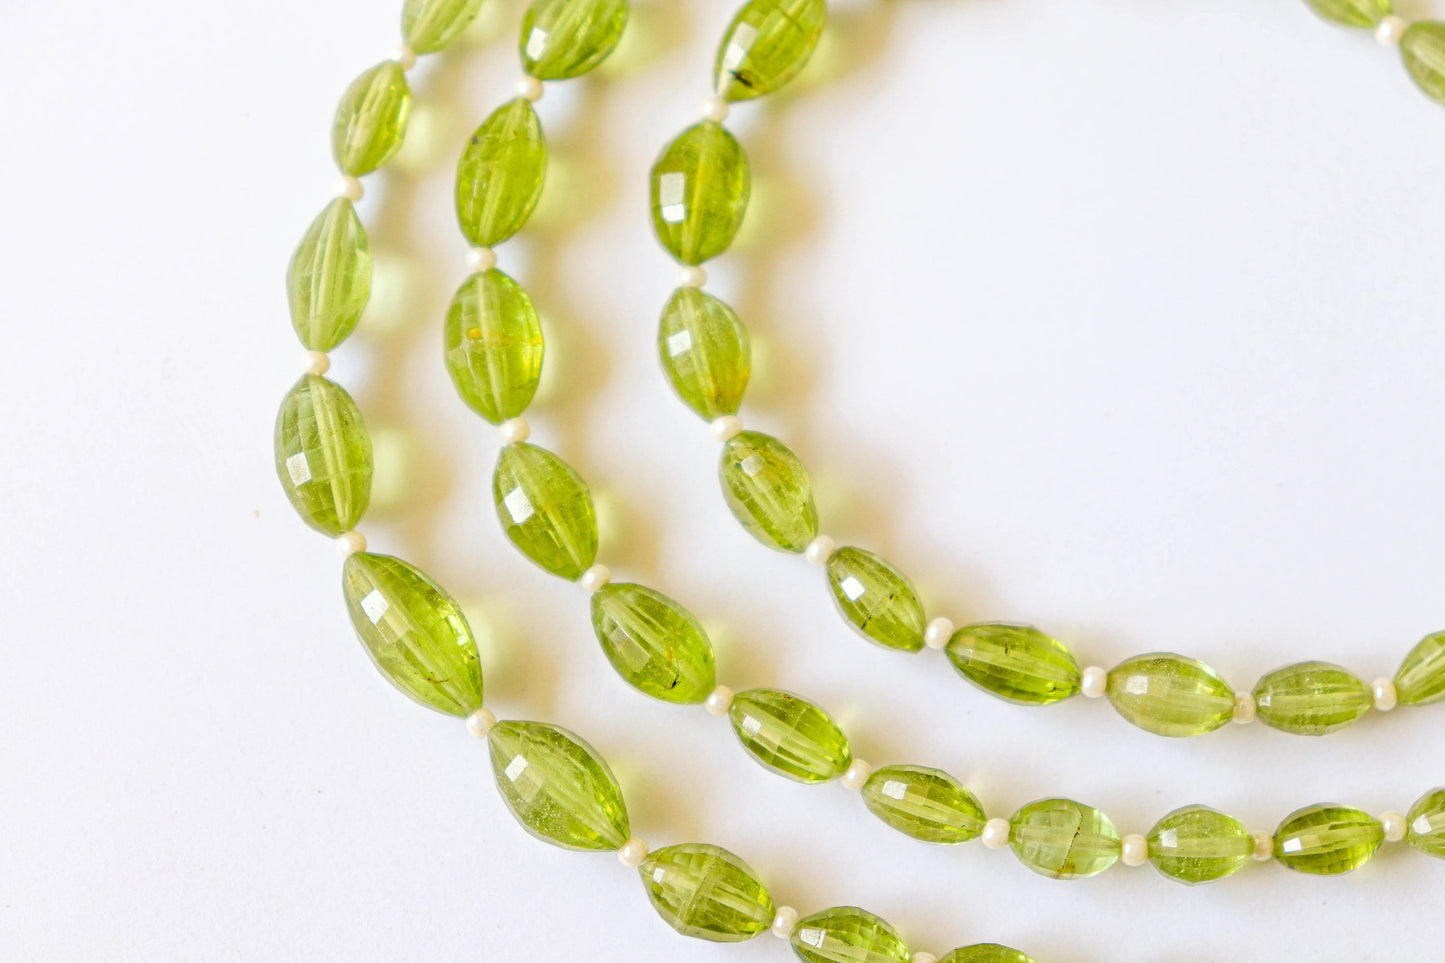 Peridot Oval Shape Step cut beads, 4x5mm to 8x13mm, 8 inch Full String, 22 Pieces, Natural Gemstone, Beadsforyourjewellery